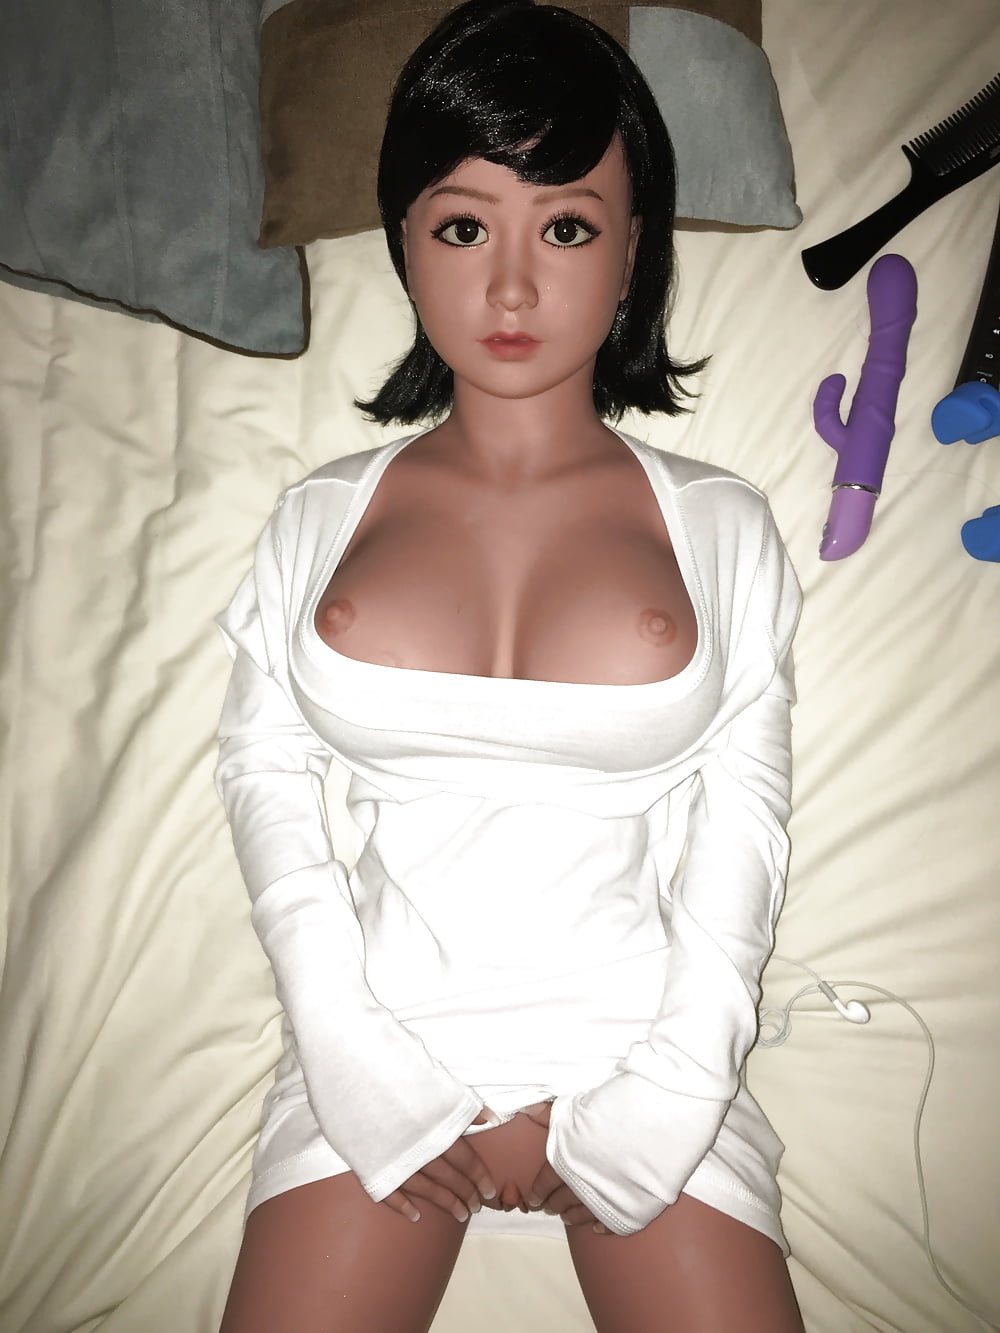 Asian Sex Doll - See and Save As asian sex doll porn pict - Xhams.Gesek.Info